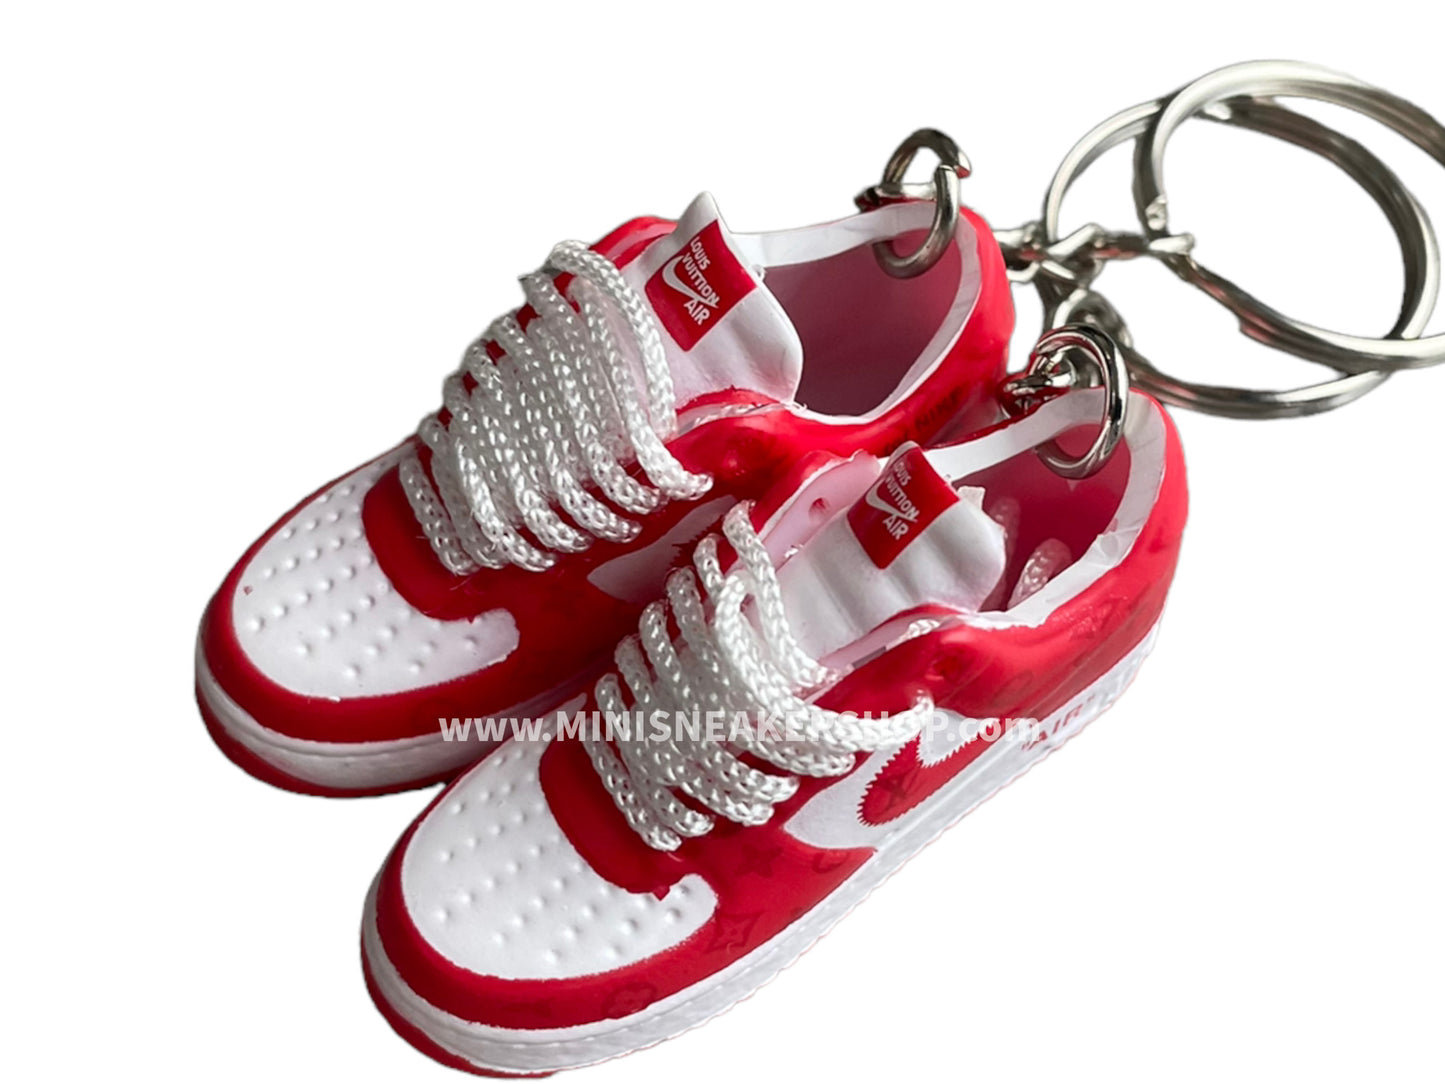 Mini 3D sneaker keychains Air Force 1 x LV - Red White